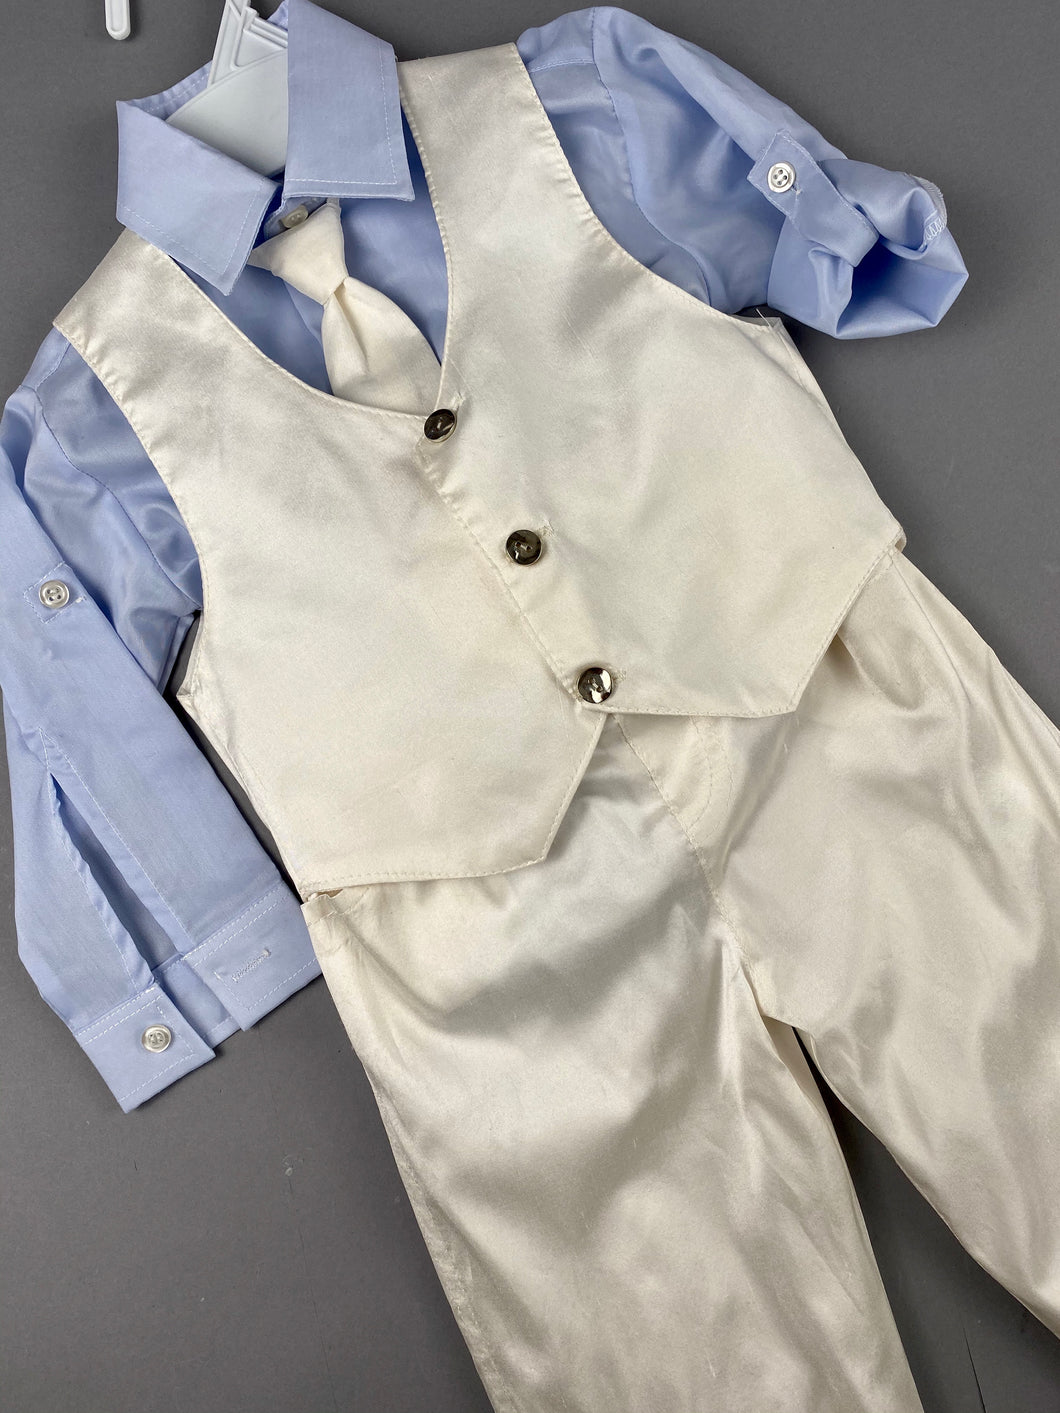 Rosies Collections 7pc full silk suit, Light Blue Dress shirt, Cuff sleeves, Pants, Jacket, Vest, Belt or Suspenders, Cap. Made in Greece exclusively for Rosies Collections S201921